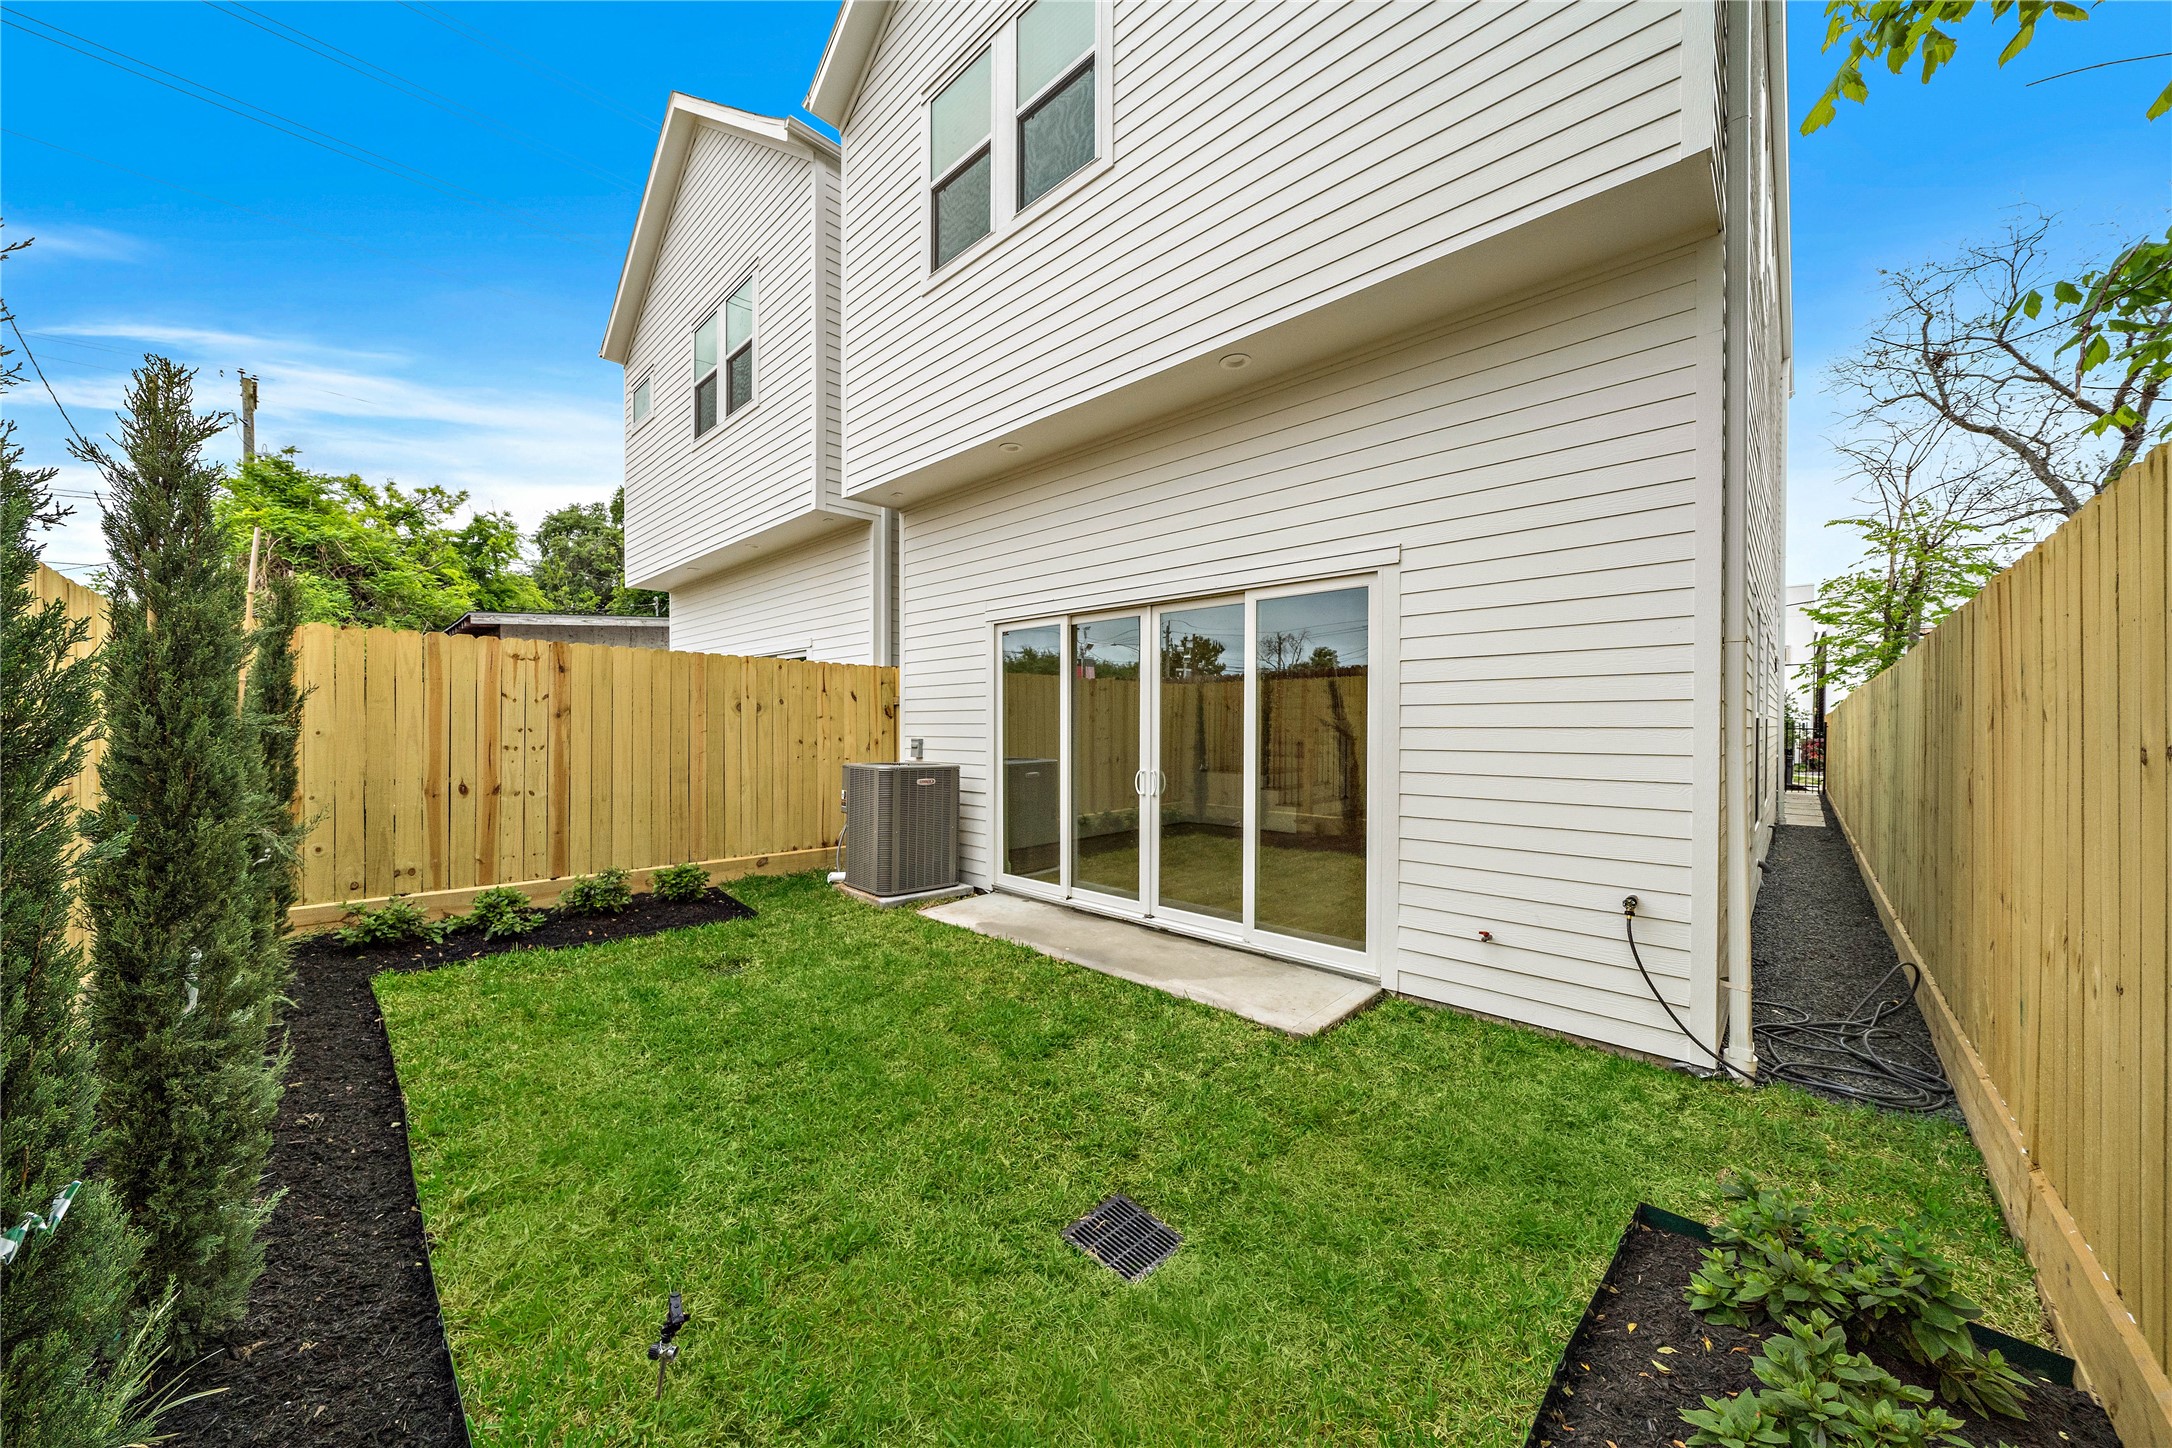 Large private backyard, perfect for entertaining! (Yard features upgraded landscape package.)